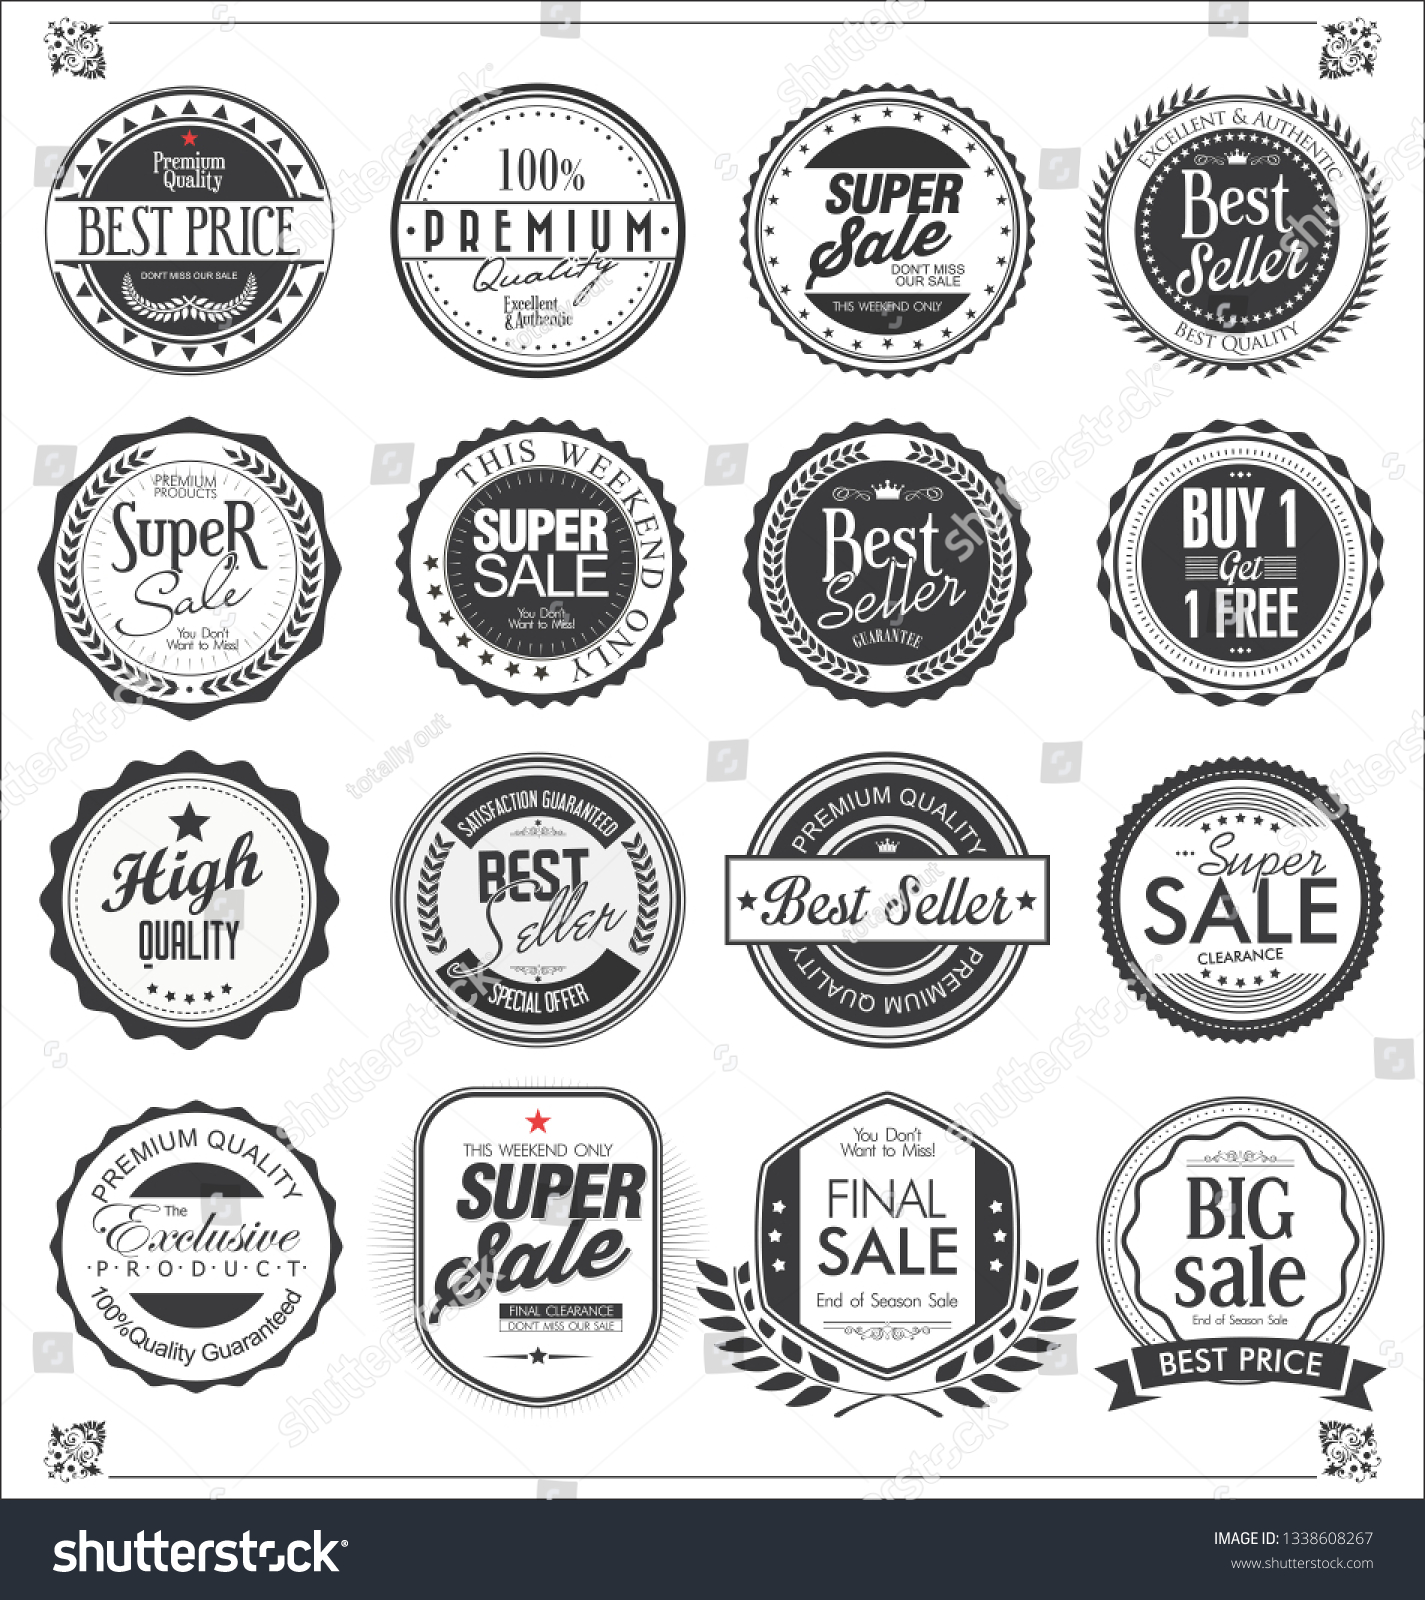 Retro vintage badges and labels collection vector  #1338608267